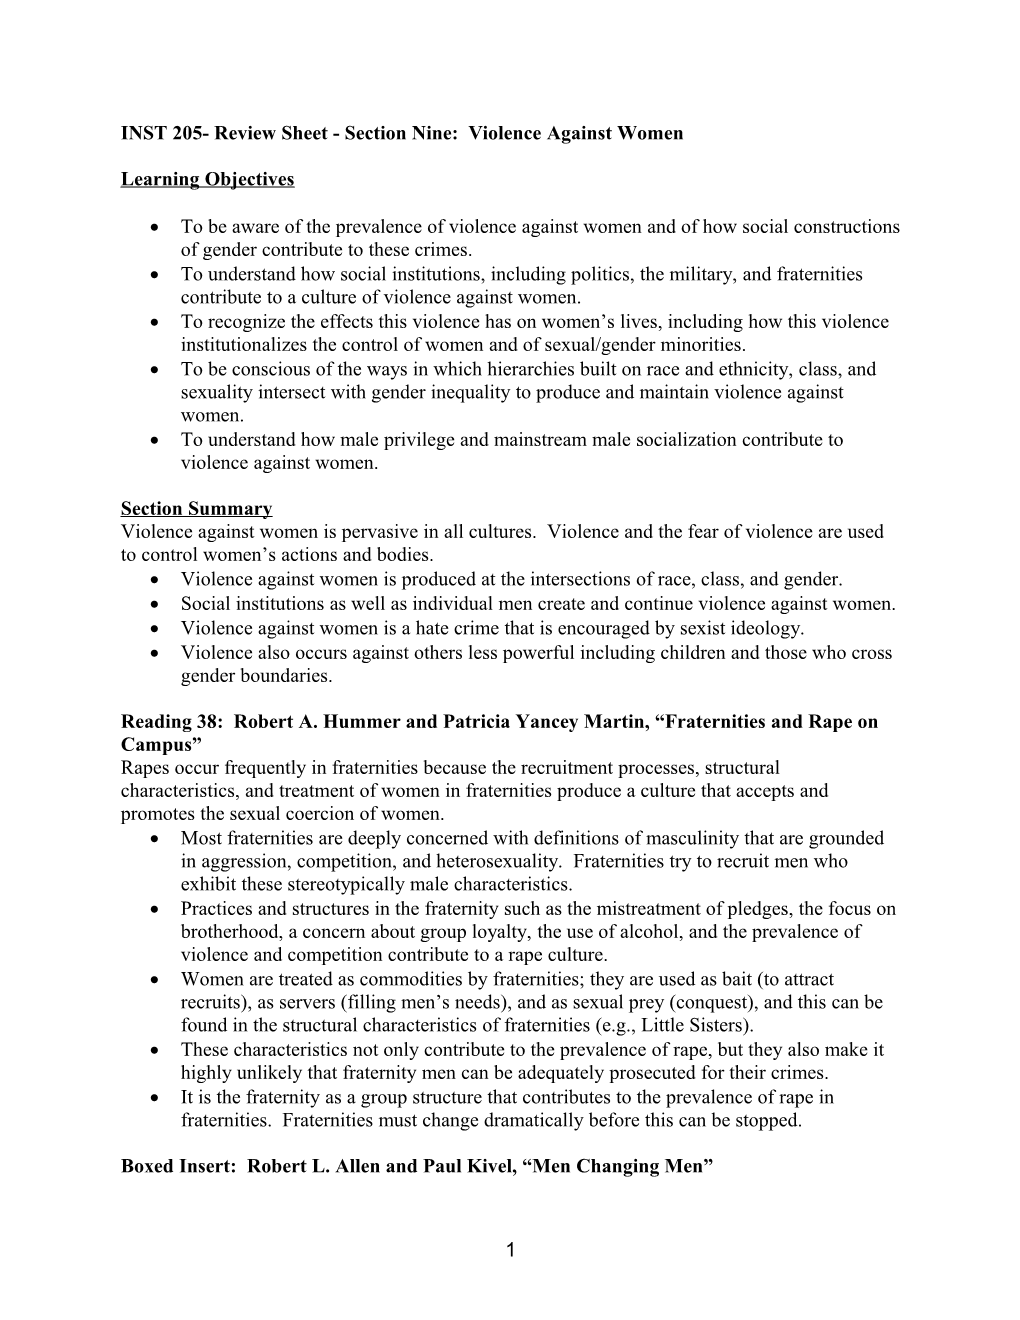 INST 205- Review Sheet - Section Nine: Violence Against Women